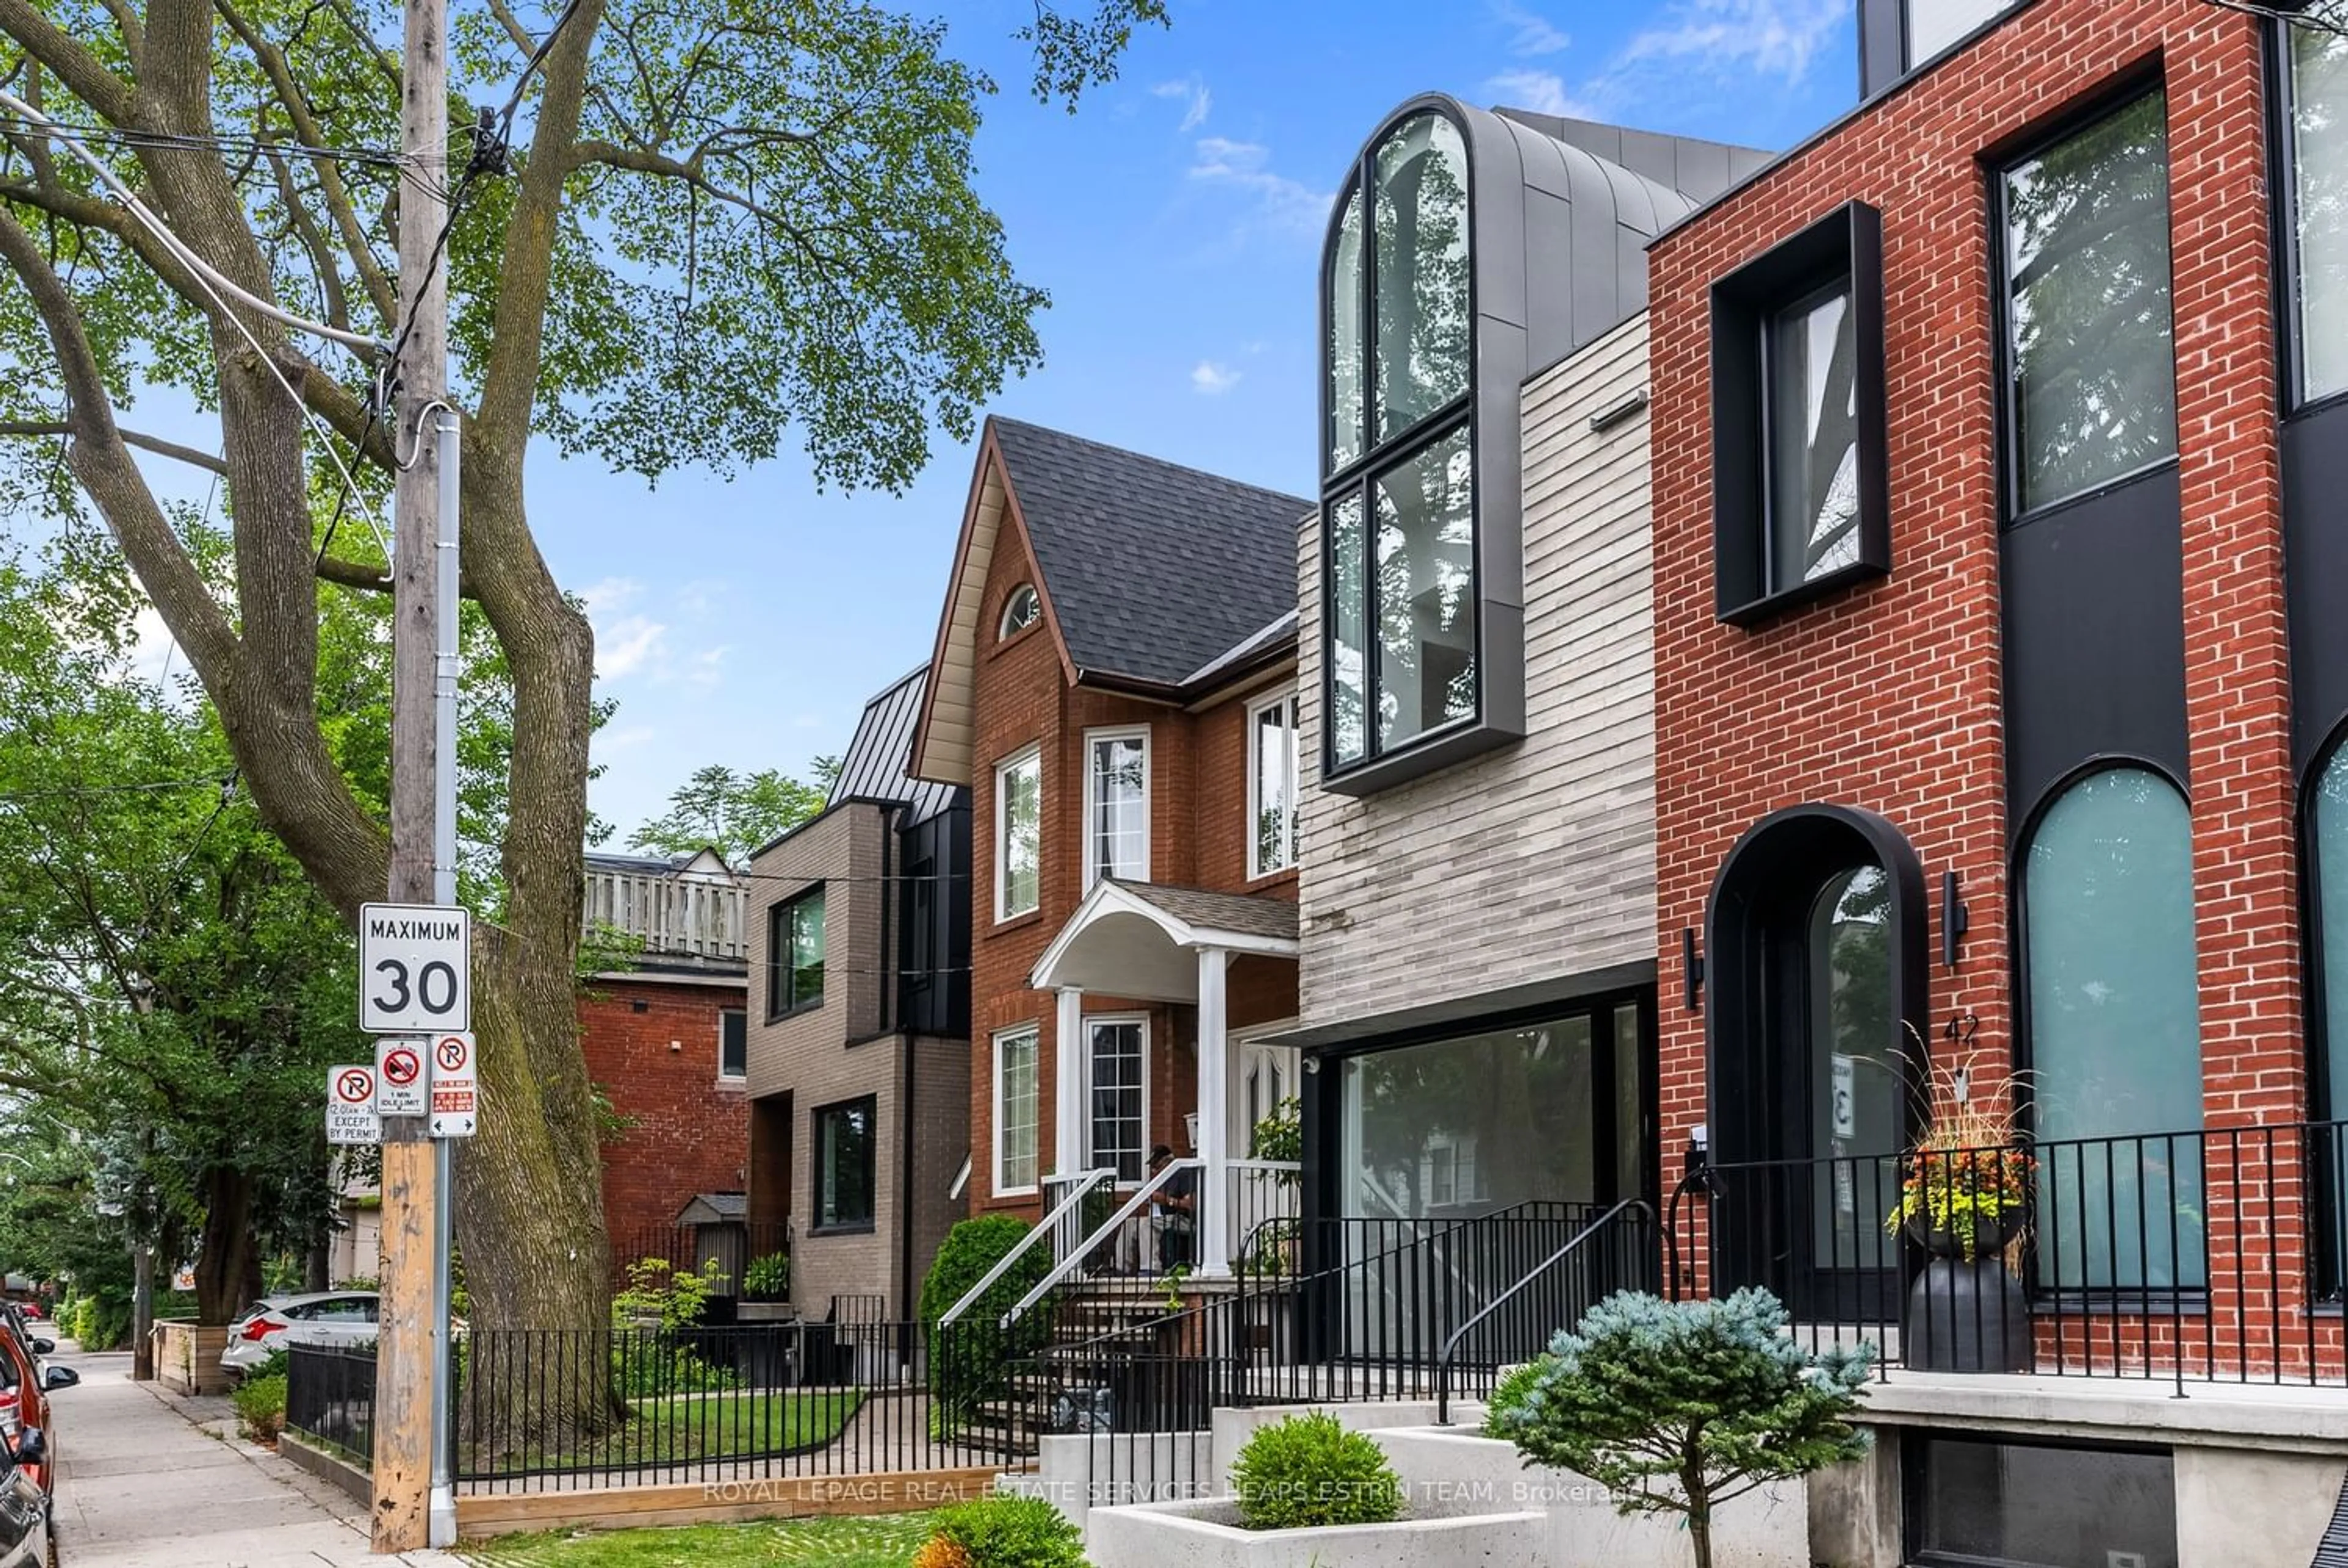 Home with brick exterior material for 44 Foxley St, Toronto Ontario M6J 1R1